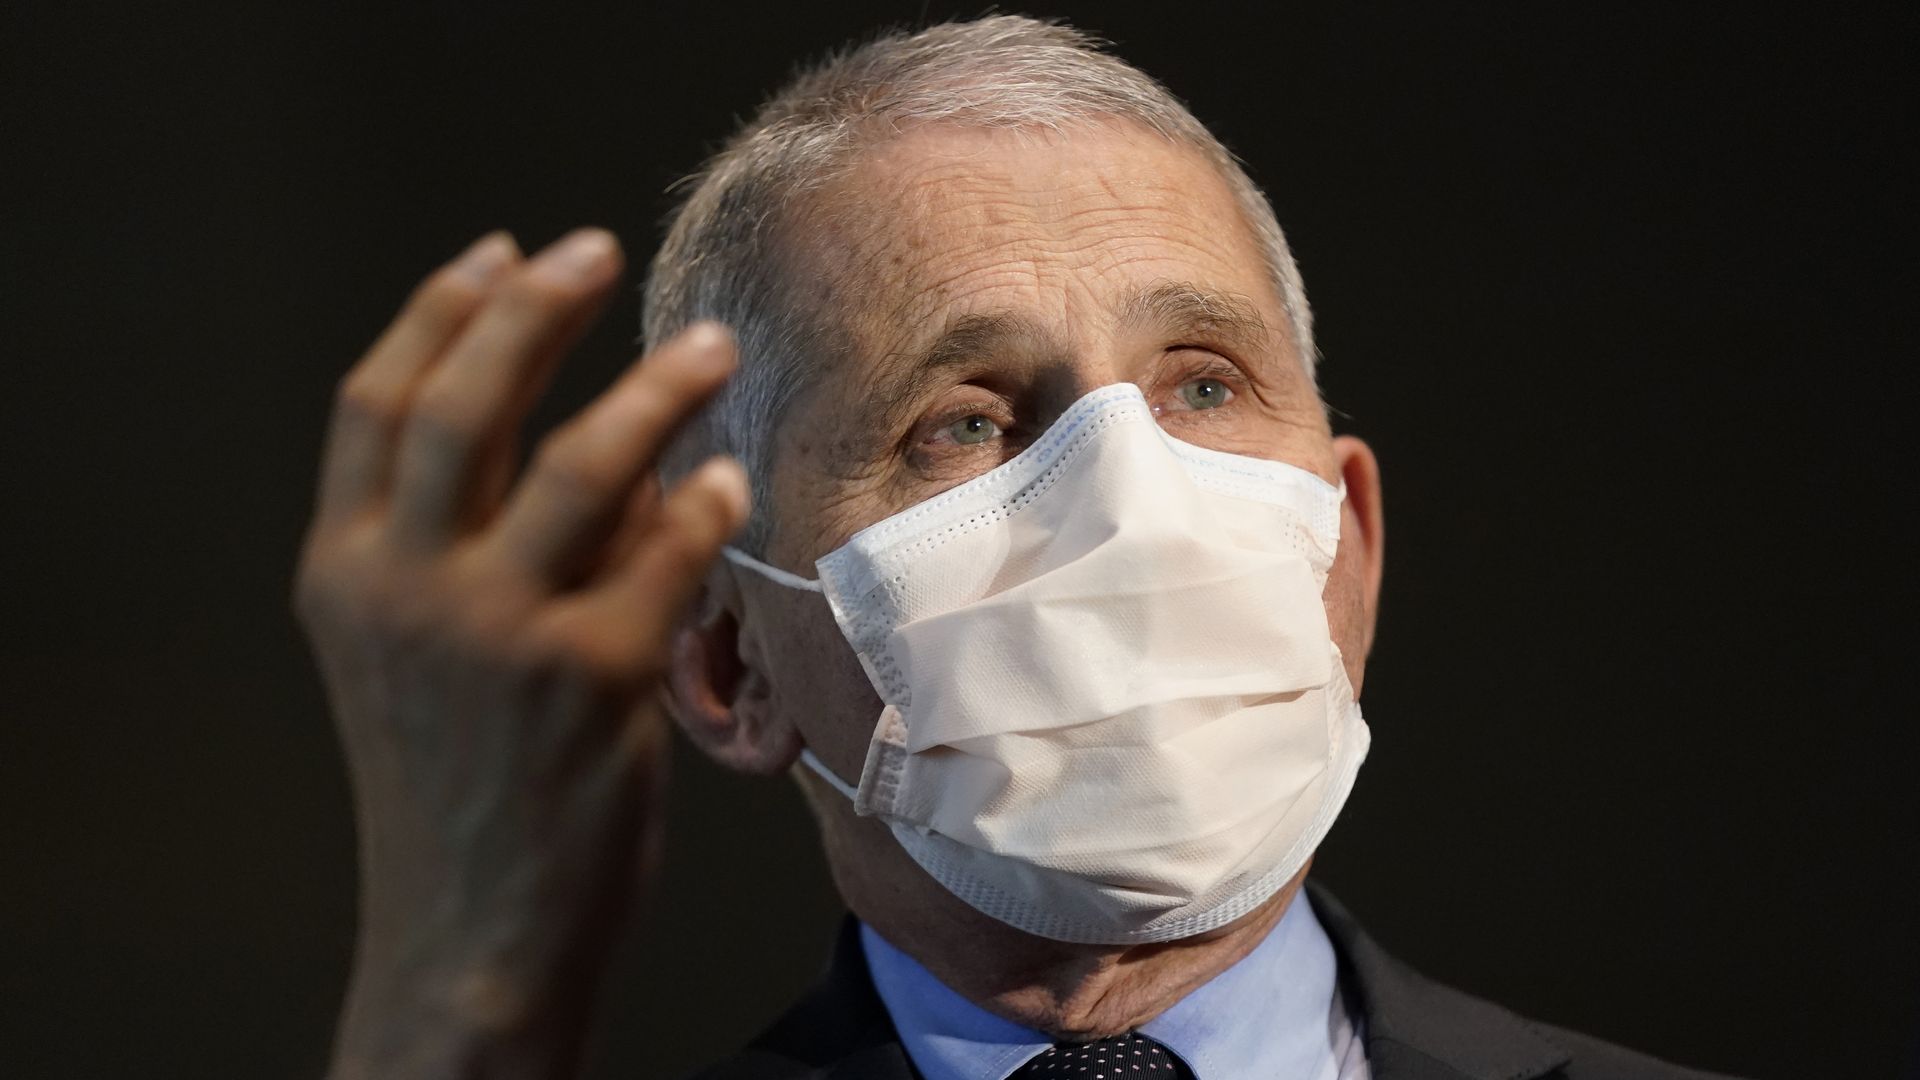 Anthony fauci close up of wearing a mask